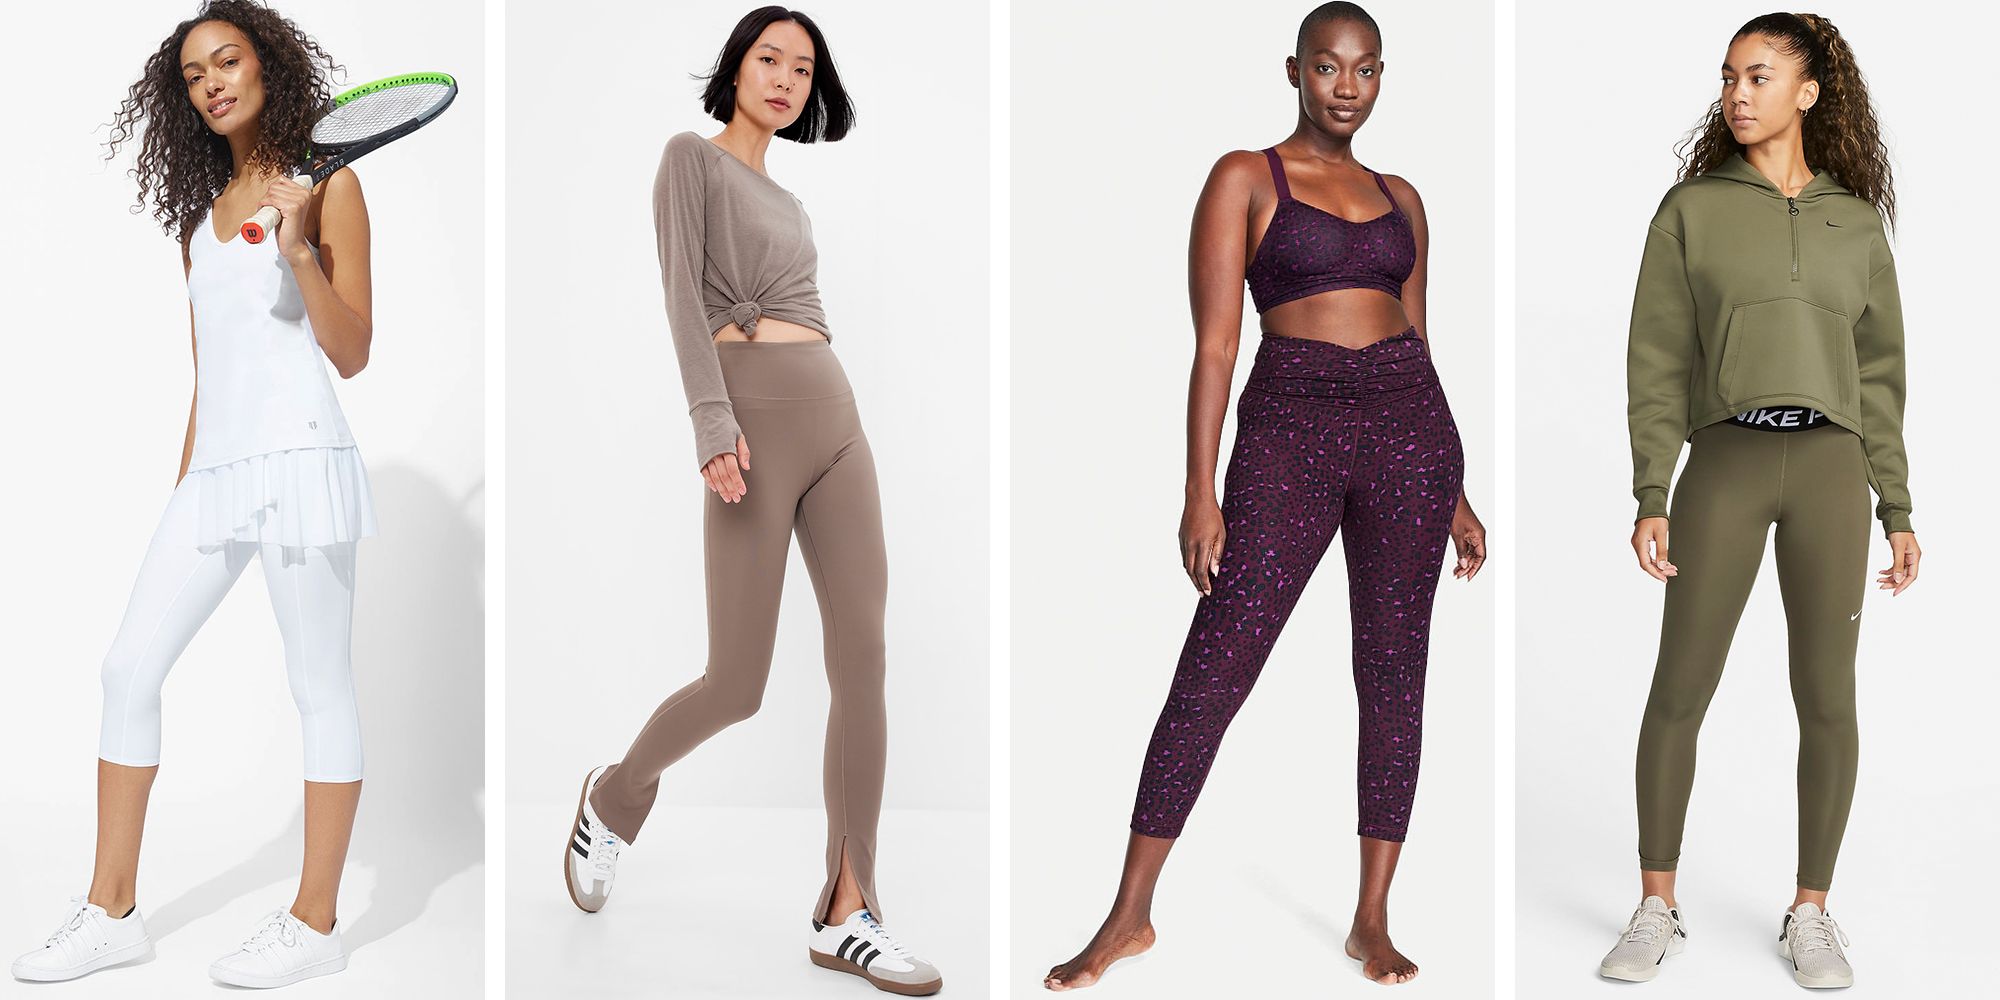 Emtalks: The Best Gym And Workout Leggings Plus Best Every Day Leggings